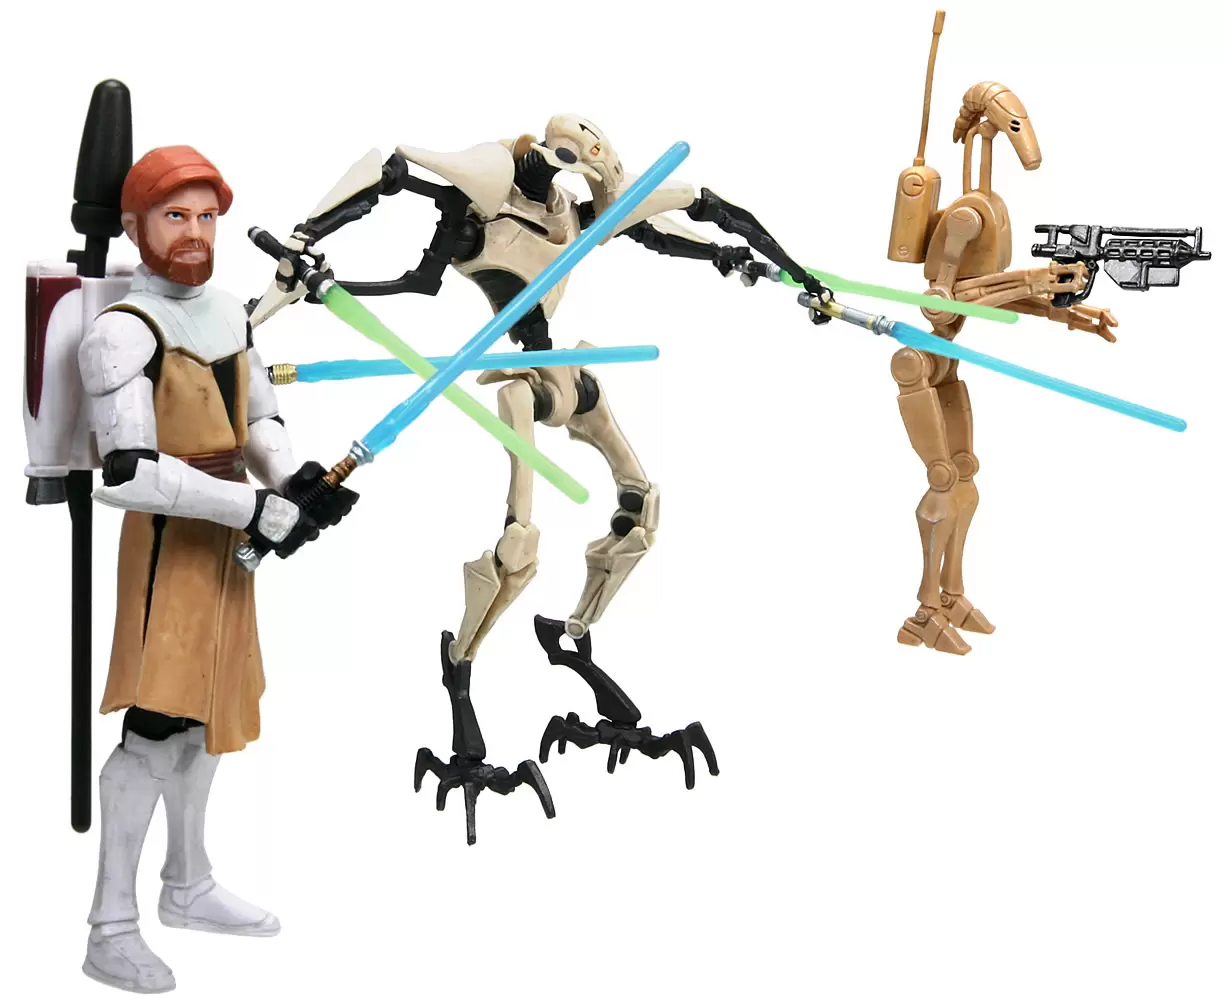 The Clone Wars (TCW 2008) - Commemorative DVD Collection - General Grievous, Obi-Wan Kenobi, and Battle Droid